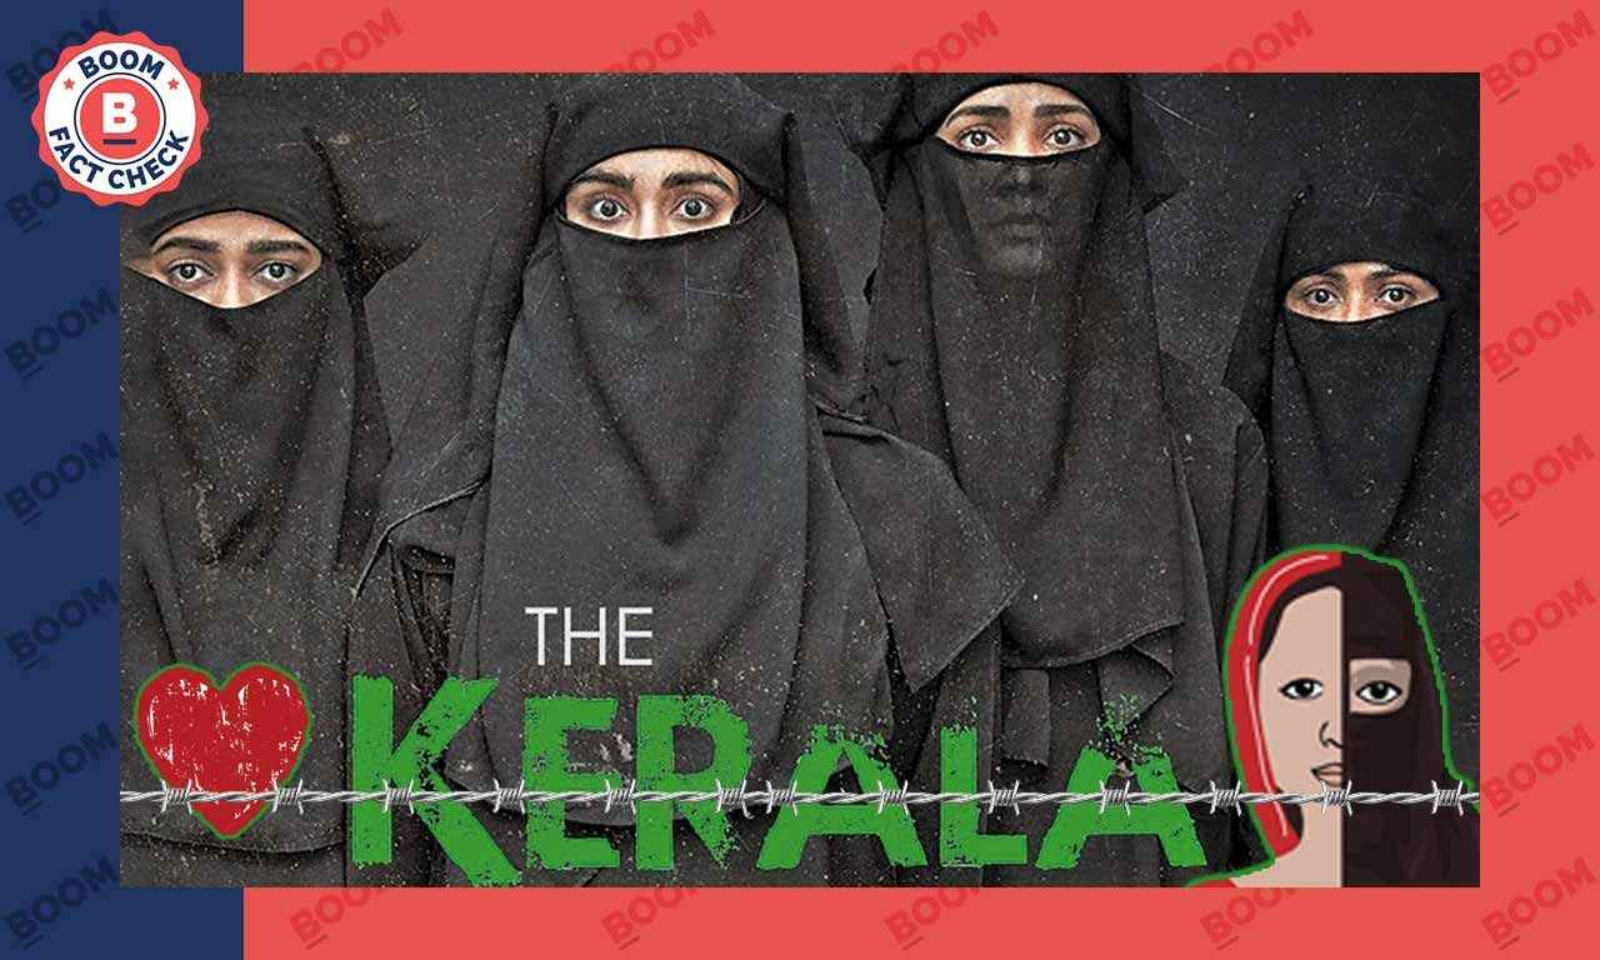 32K Women Missing Claim Made By The Kerala Story Does Not Add Up BOOM